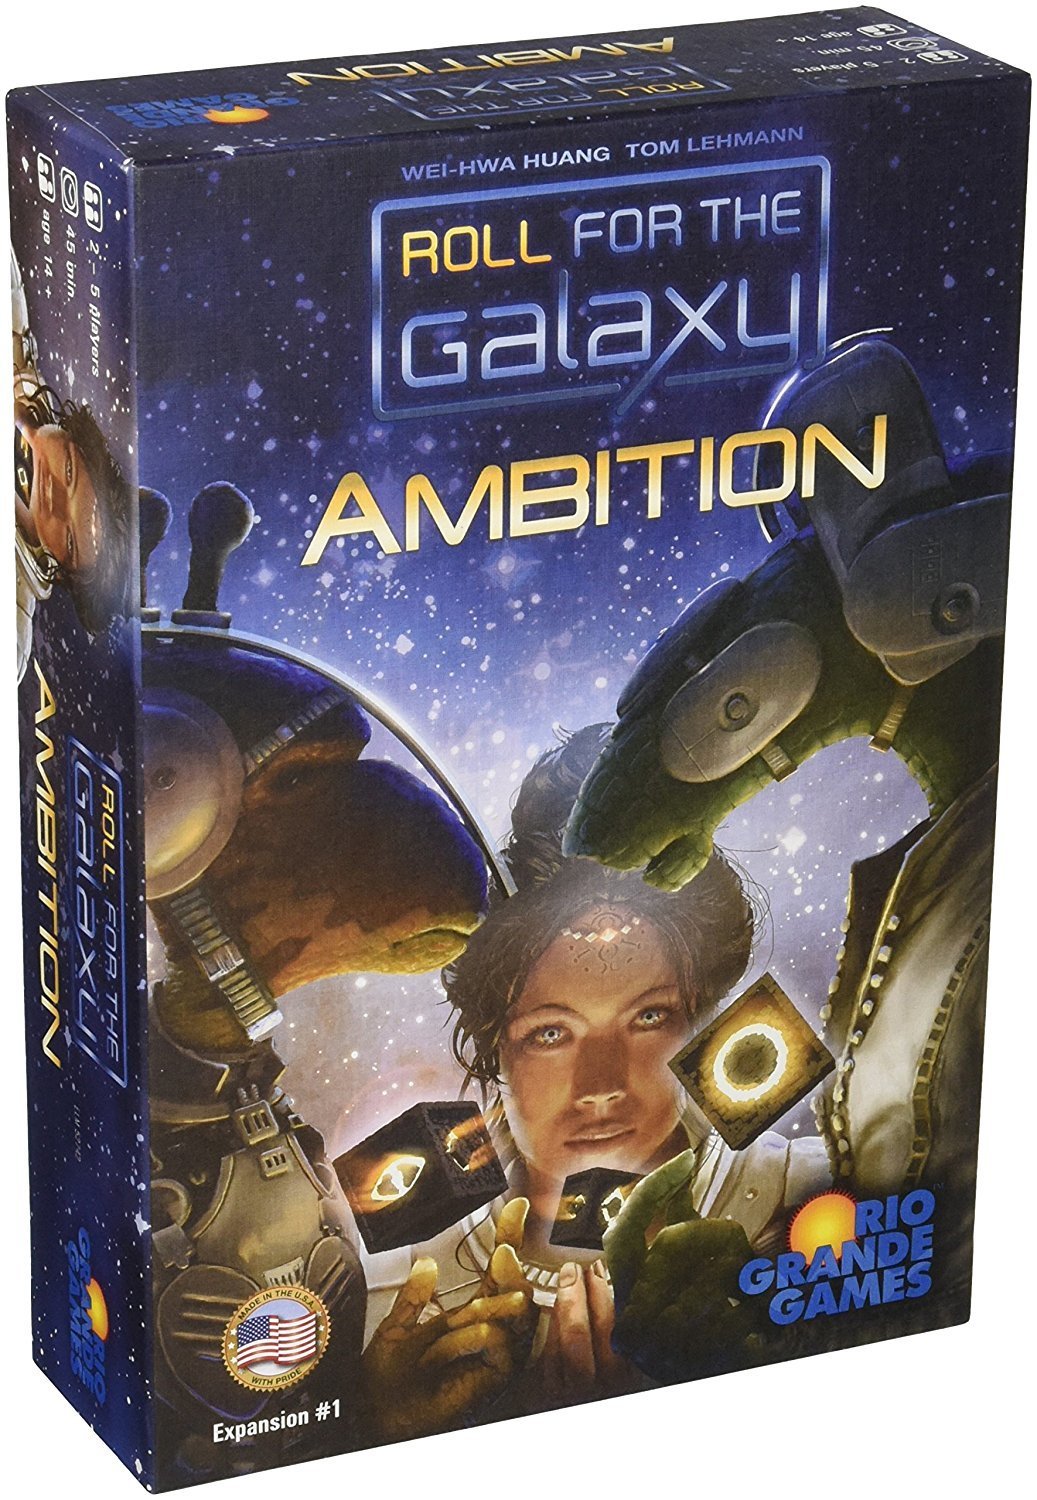 Roll for the Galaxy: Ambition (Expansion #1)